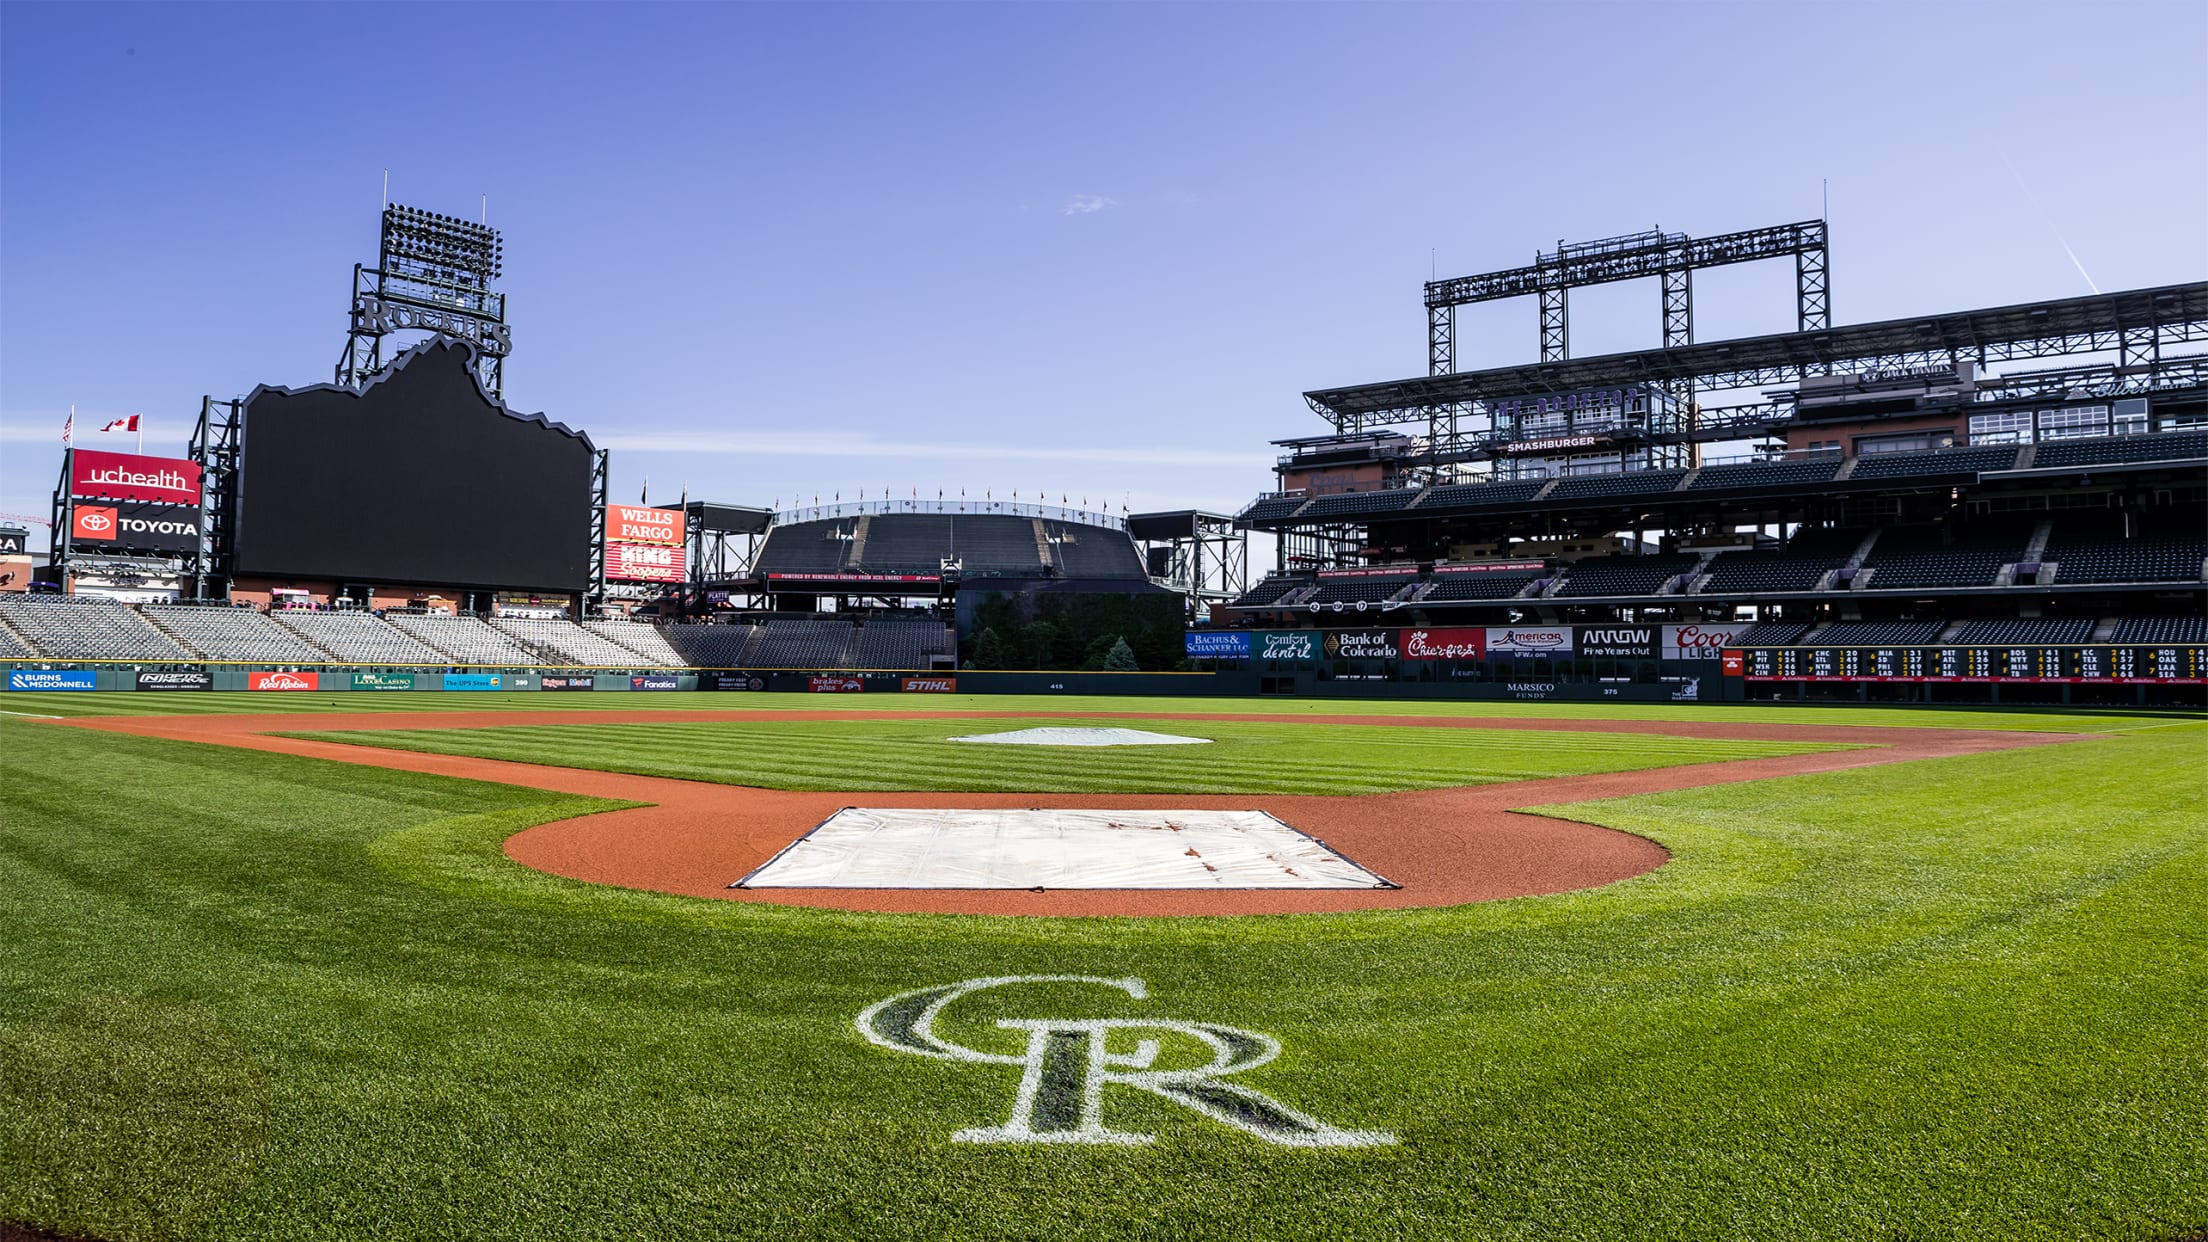 DENVER, CO - JULY 11: An overhead general view of Coors Field